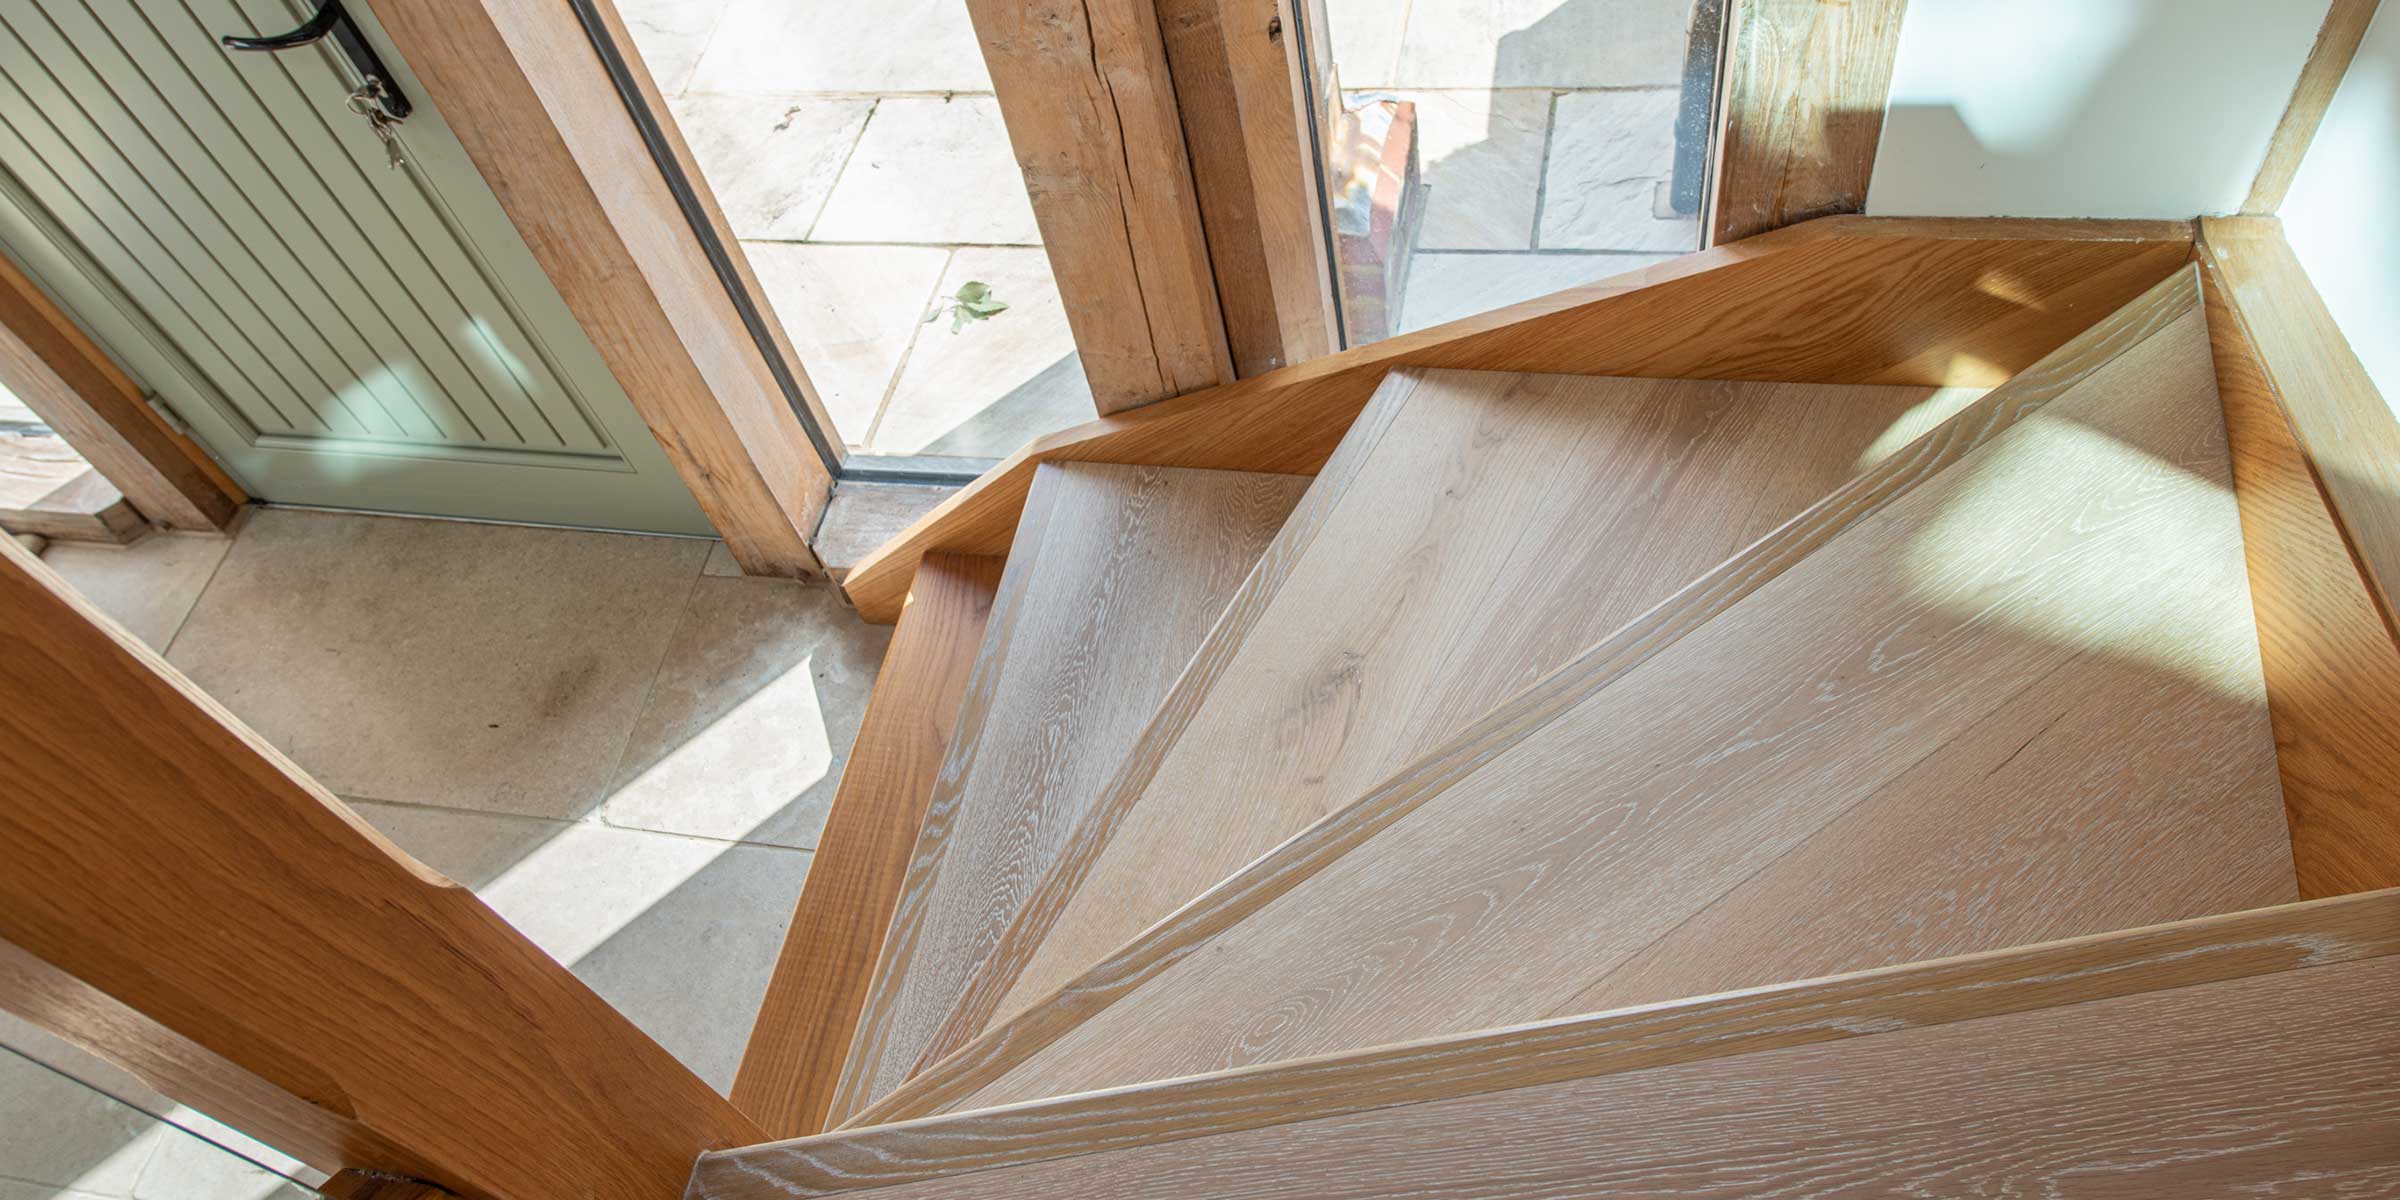 How To Install Nosing On Stairs